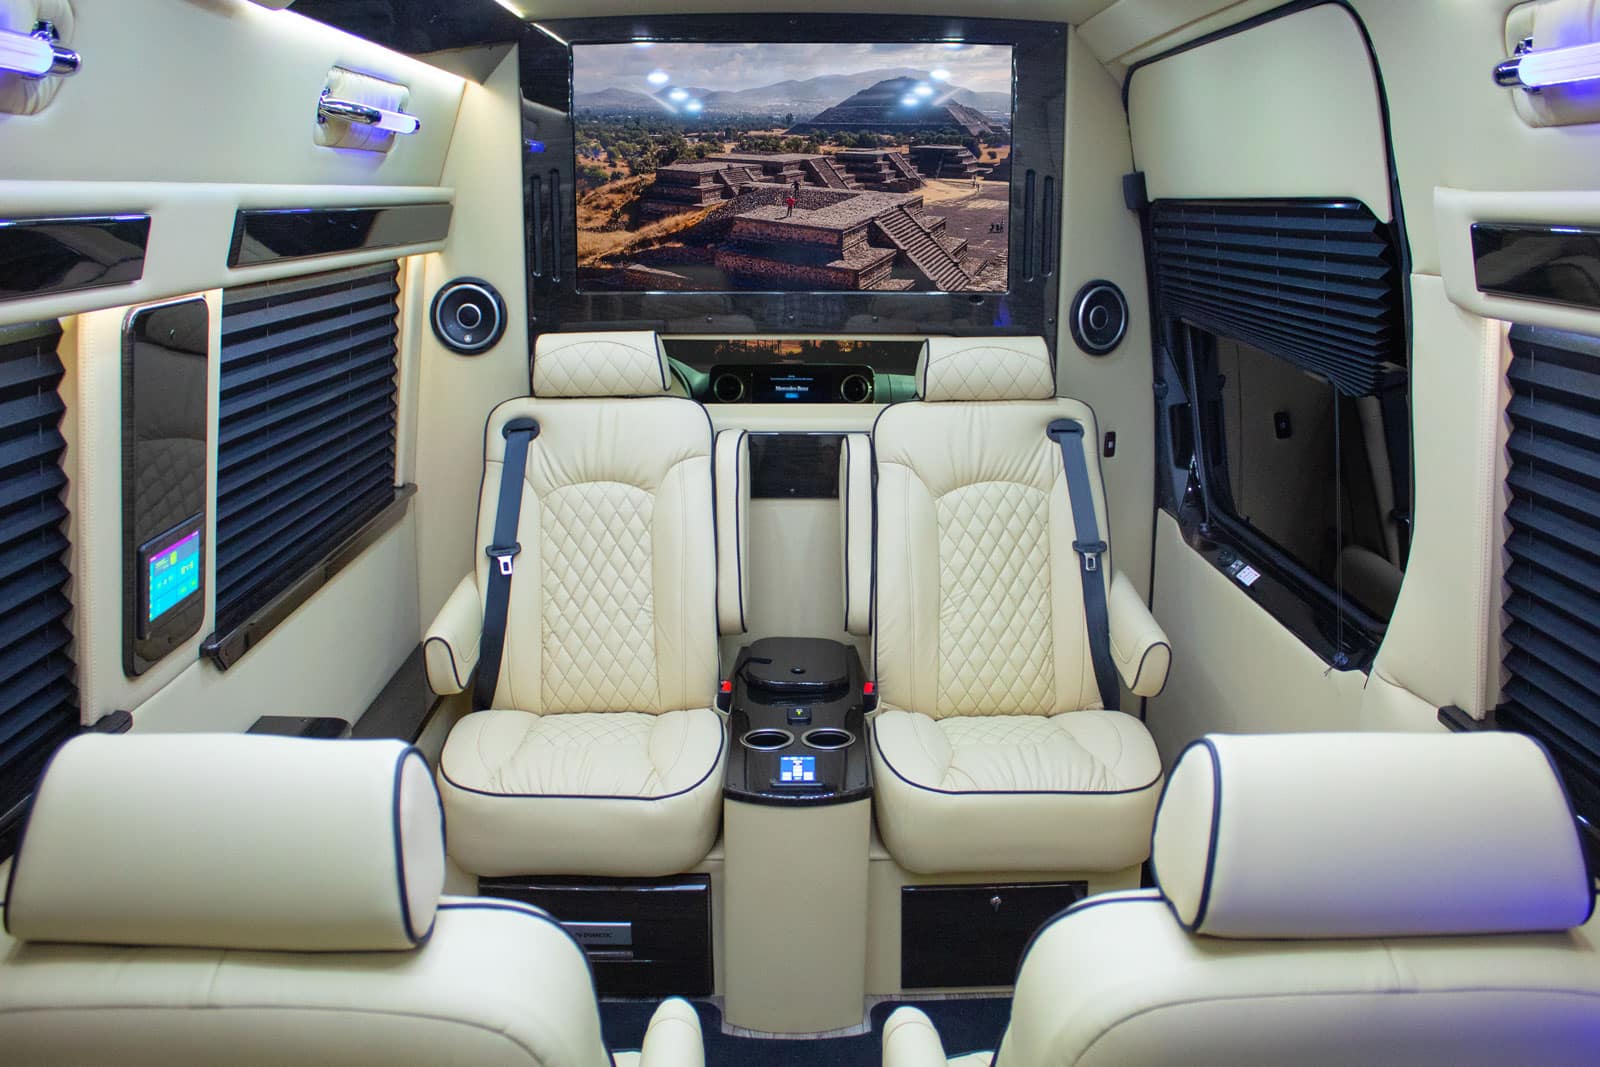 Ultimate Limo interior captain's chairs and LED tv